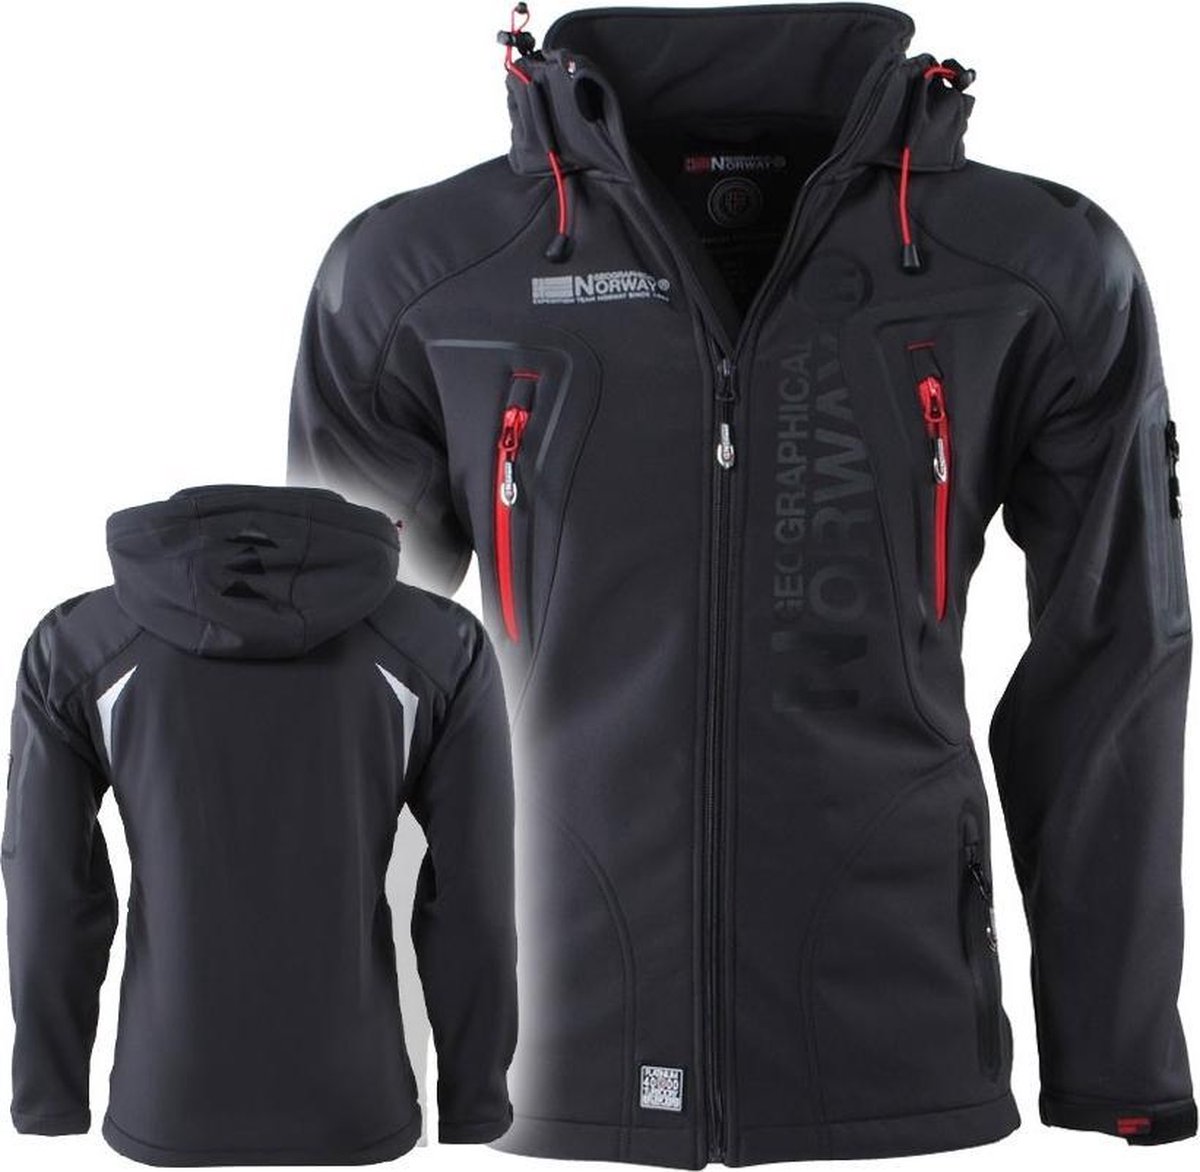 Geographical Norway - Heren Softshell Jas - Capuchon - Techno - Donker  Grijs | bol.com